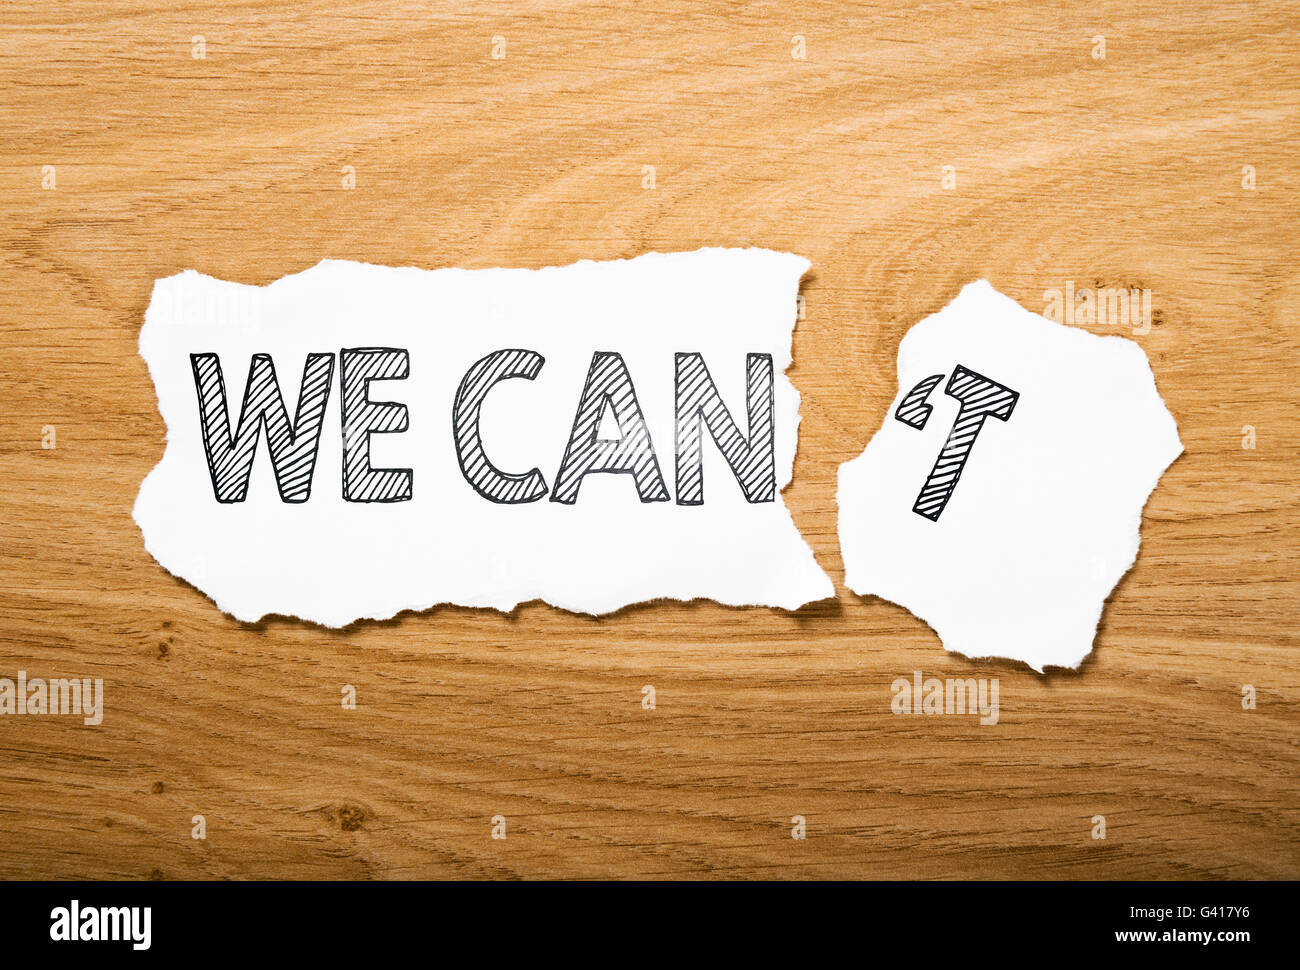 we can or we we can't: two pieces torn paper with contrast messages Stock Photo